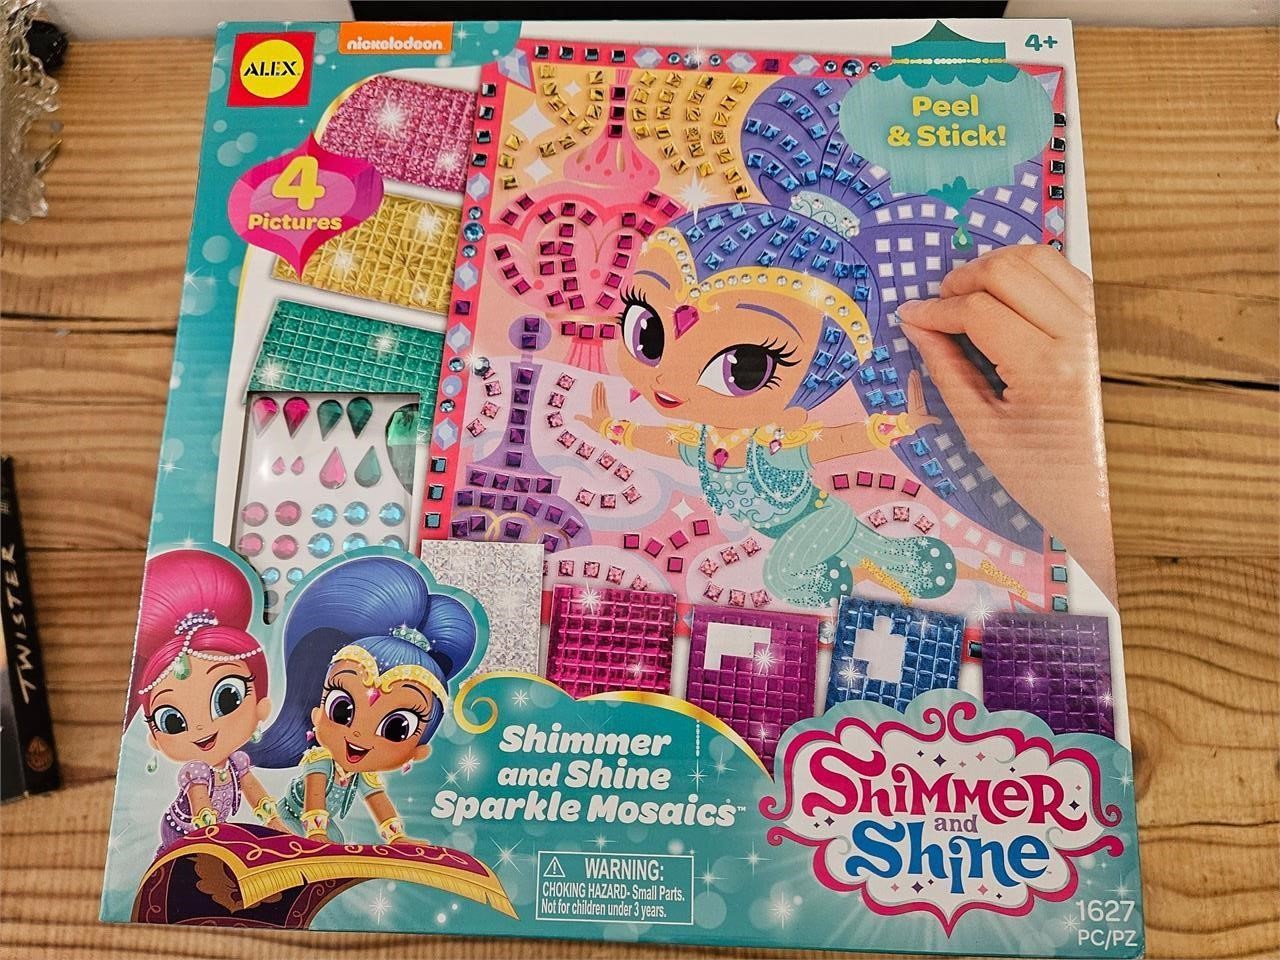 1 box of Shimmer and Shine Sparkle Mosaics